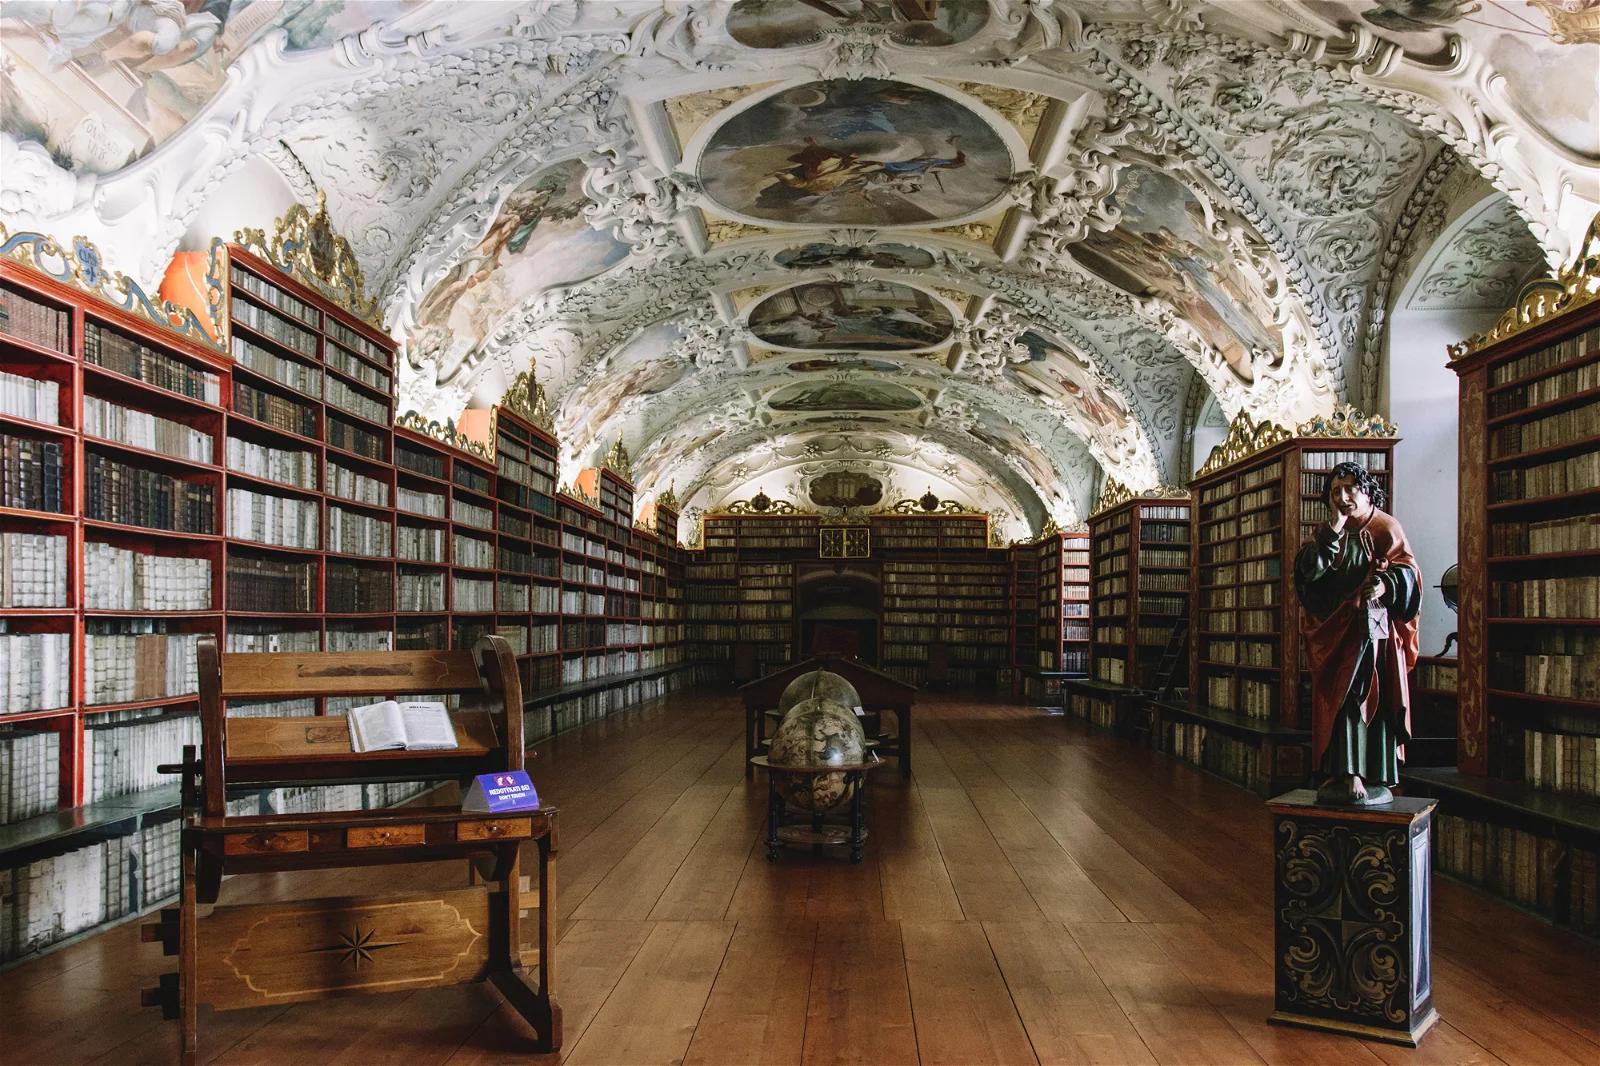 A grand, ornate library with a beautifully frescoed ceiling, filled with rows of wooden bookshelves housing numerous books, giving it a renaissance-era ambiance.
